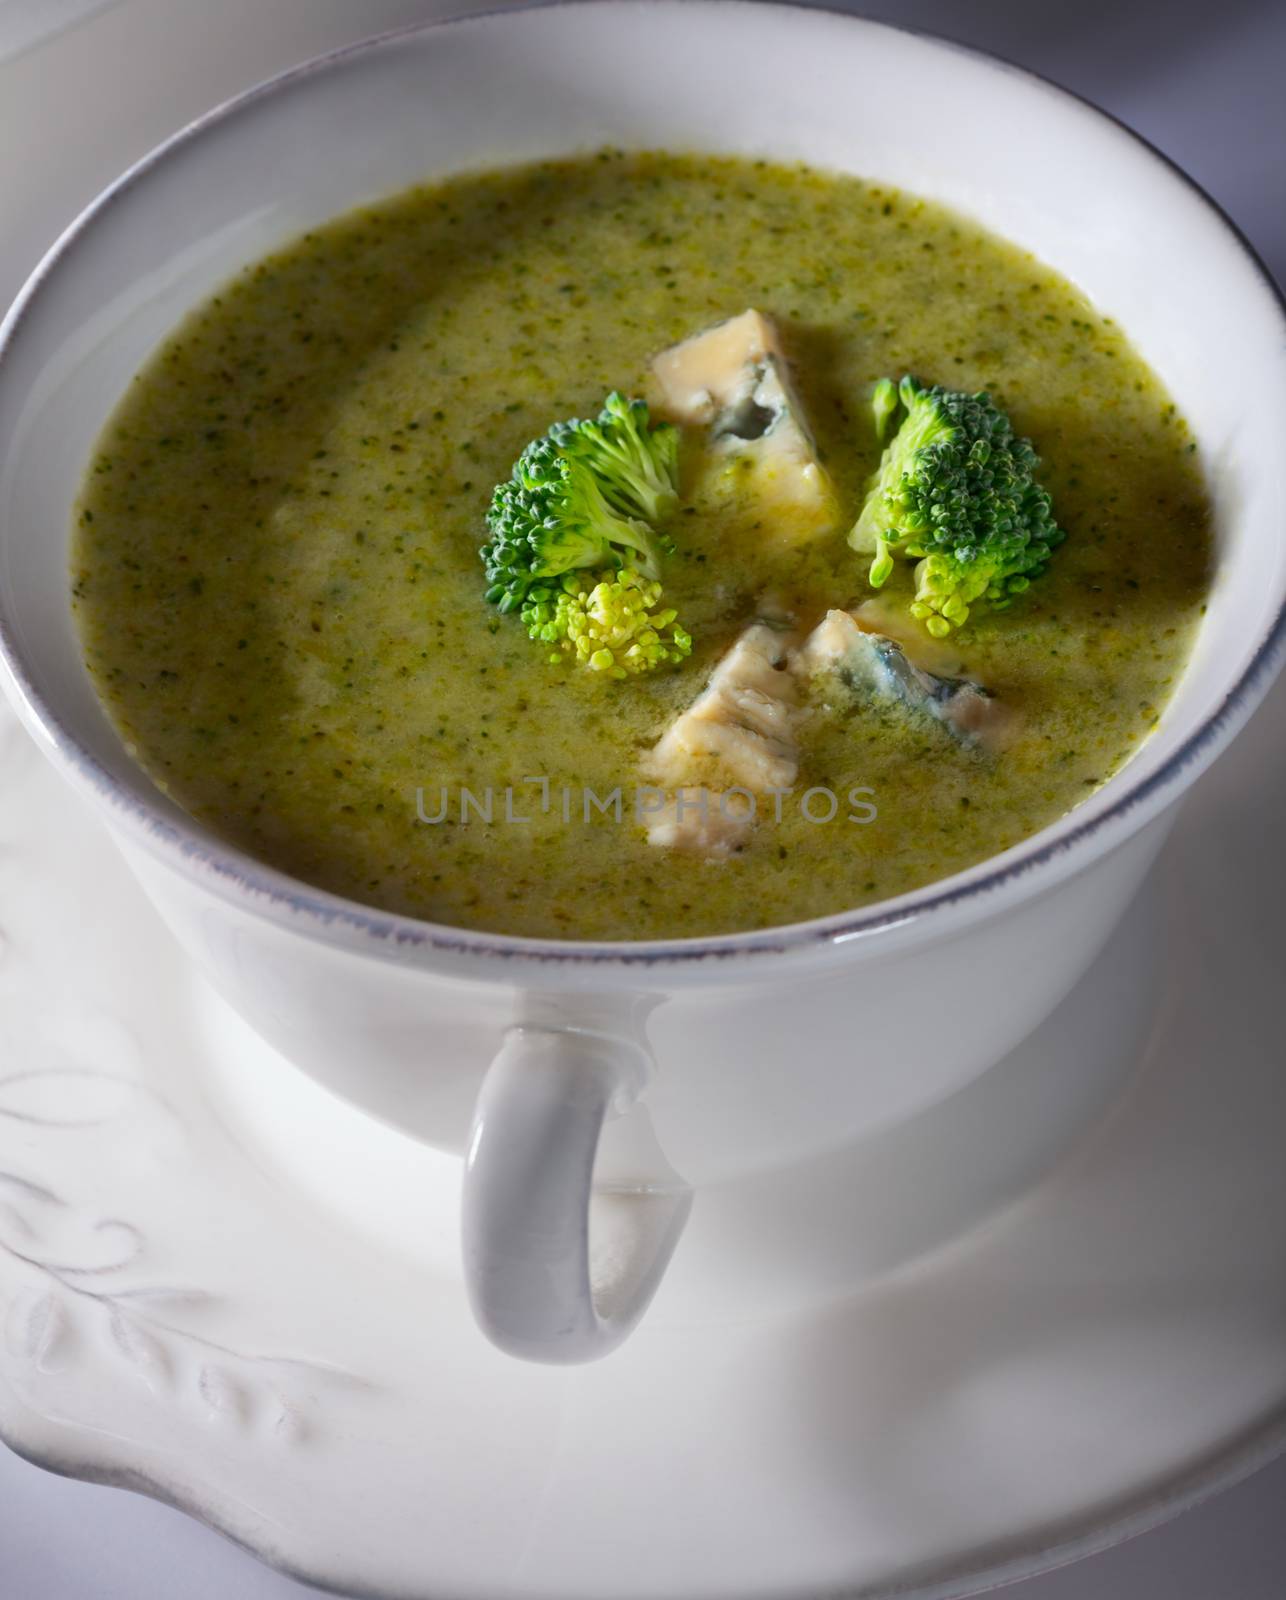 A bowl of creamy broccoli soup with blue cheese. by supercat67